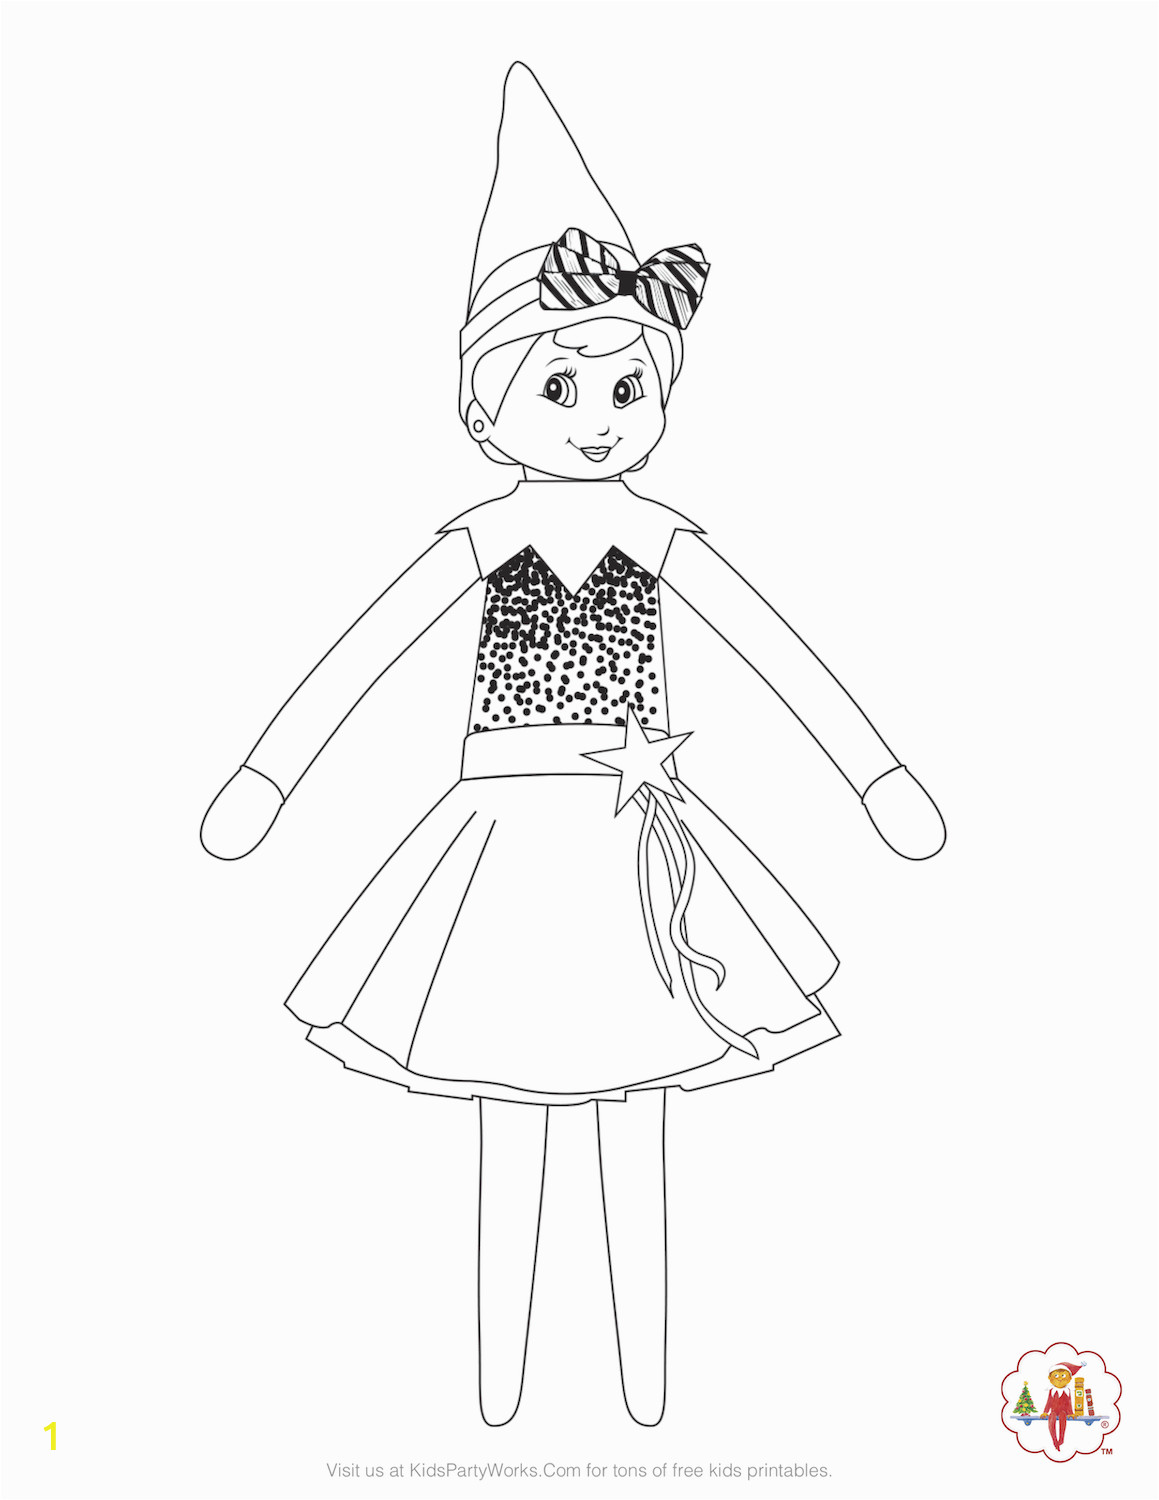 Free Printable Elf On the Shelf Coloring Pages Girl Elf On the Shelf Coloring Page She S Ready for the